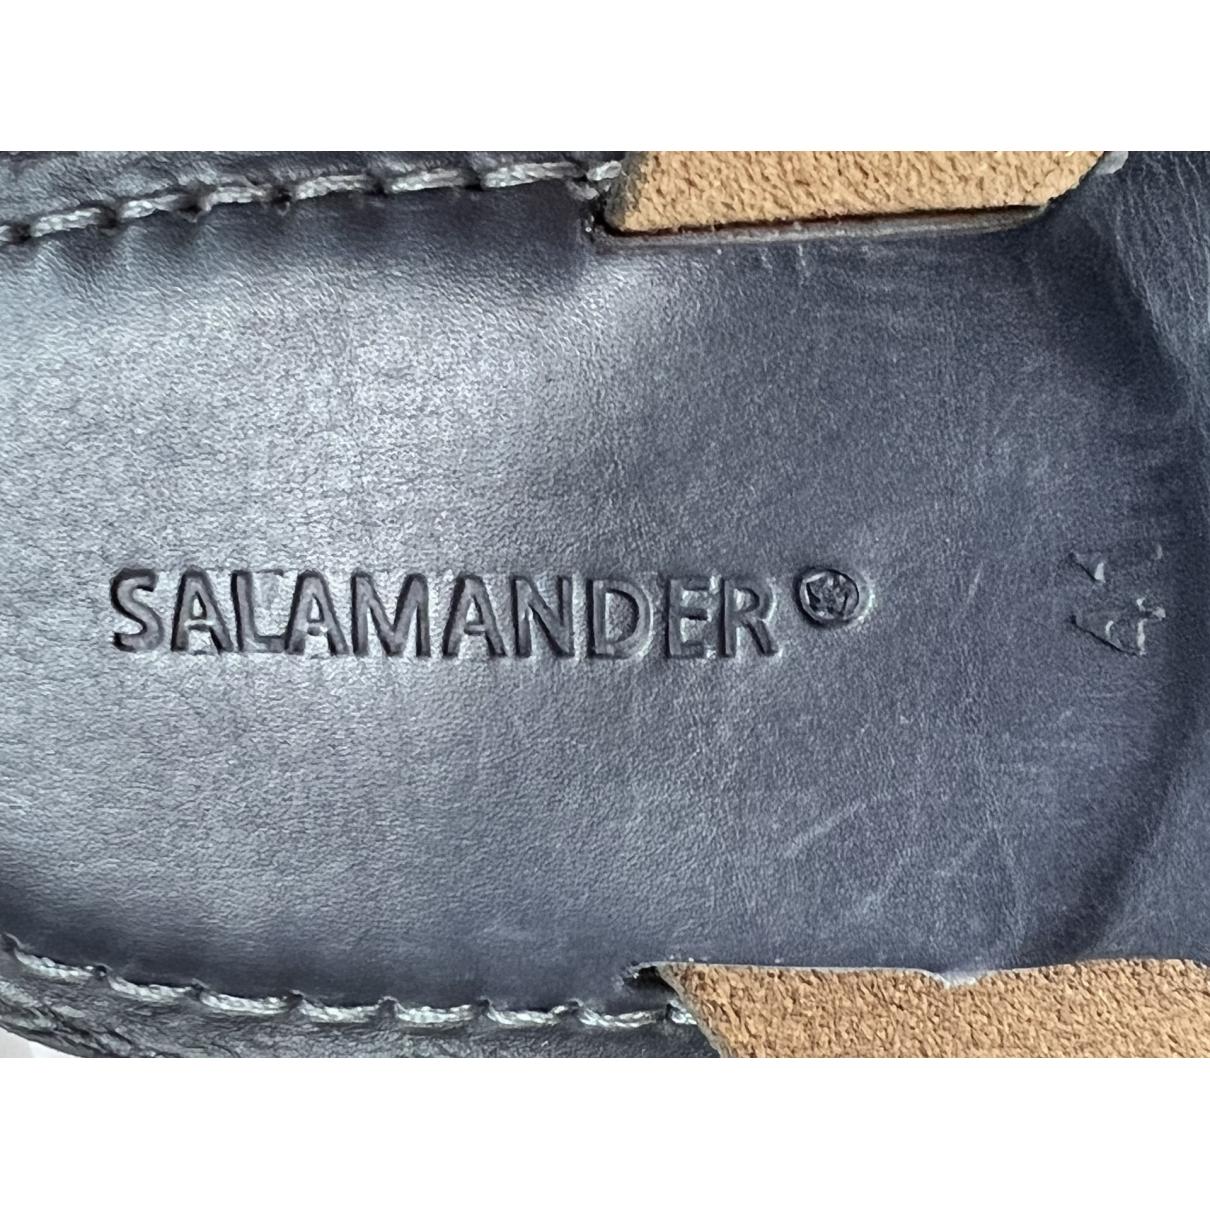 Leather sandals SALAMANDER Navy EU 41 in - size Leather 22557086